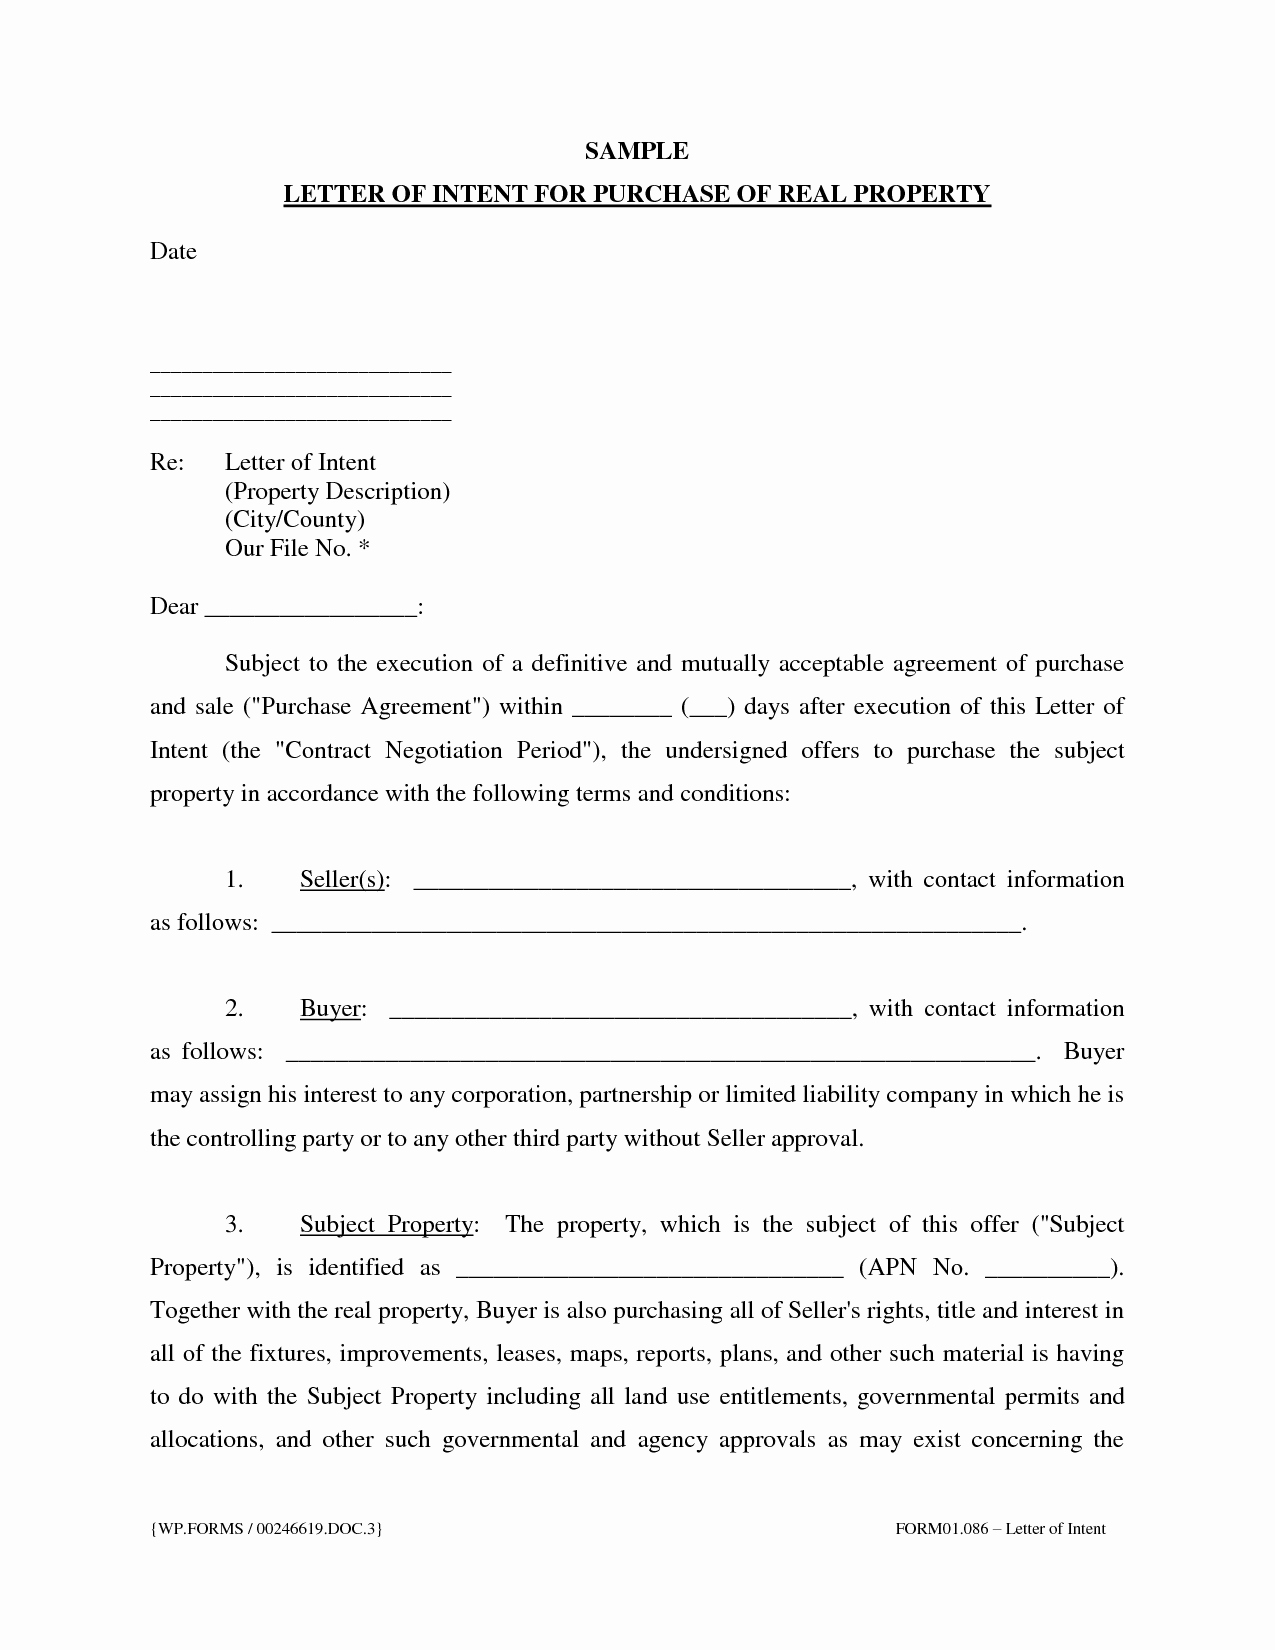 Sample Letter Intent to Purchase Real Estate Free